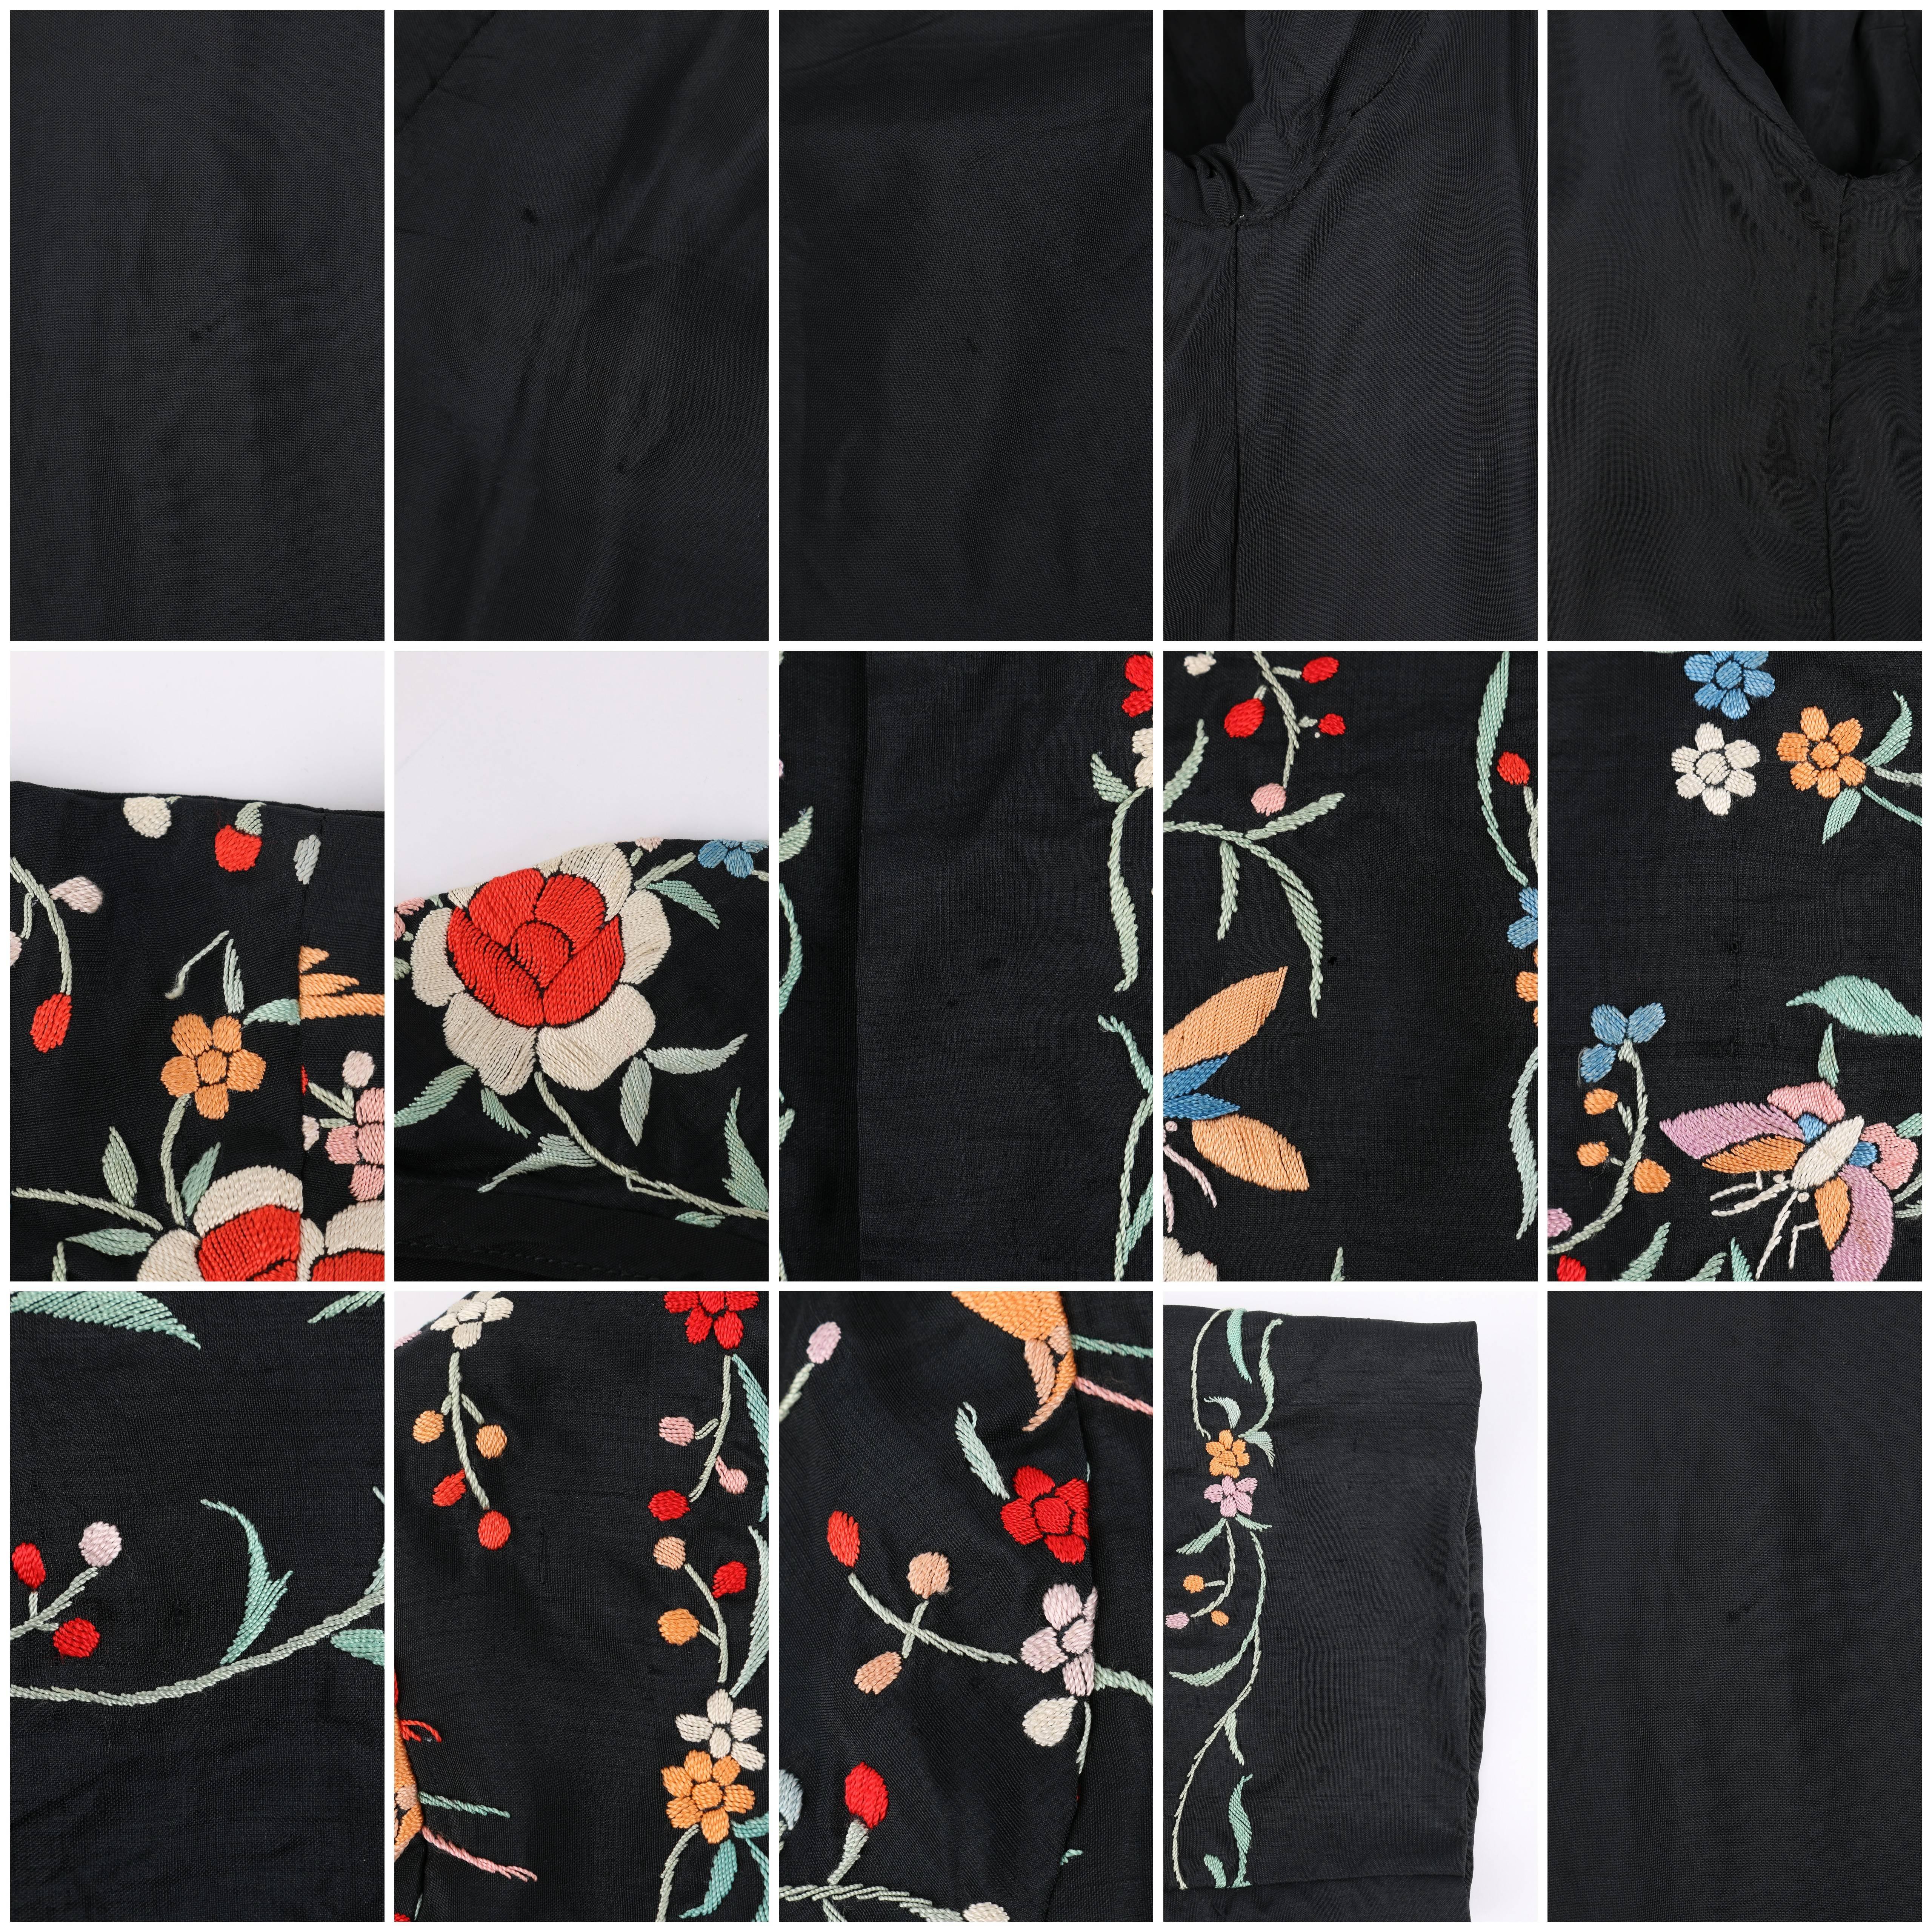 COUTURE c.1920's Black Silk Multicolor Chinese Floral Embroidered Jacket 3